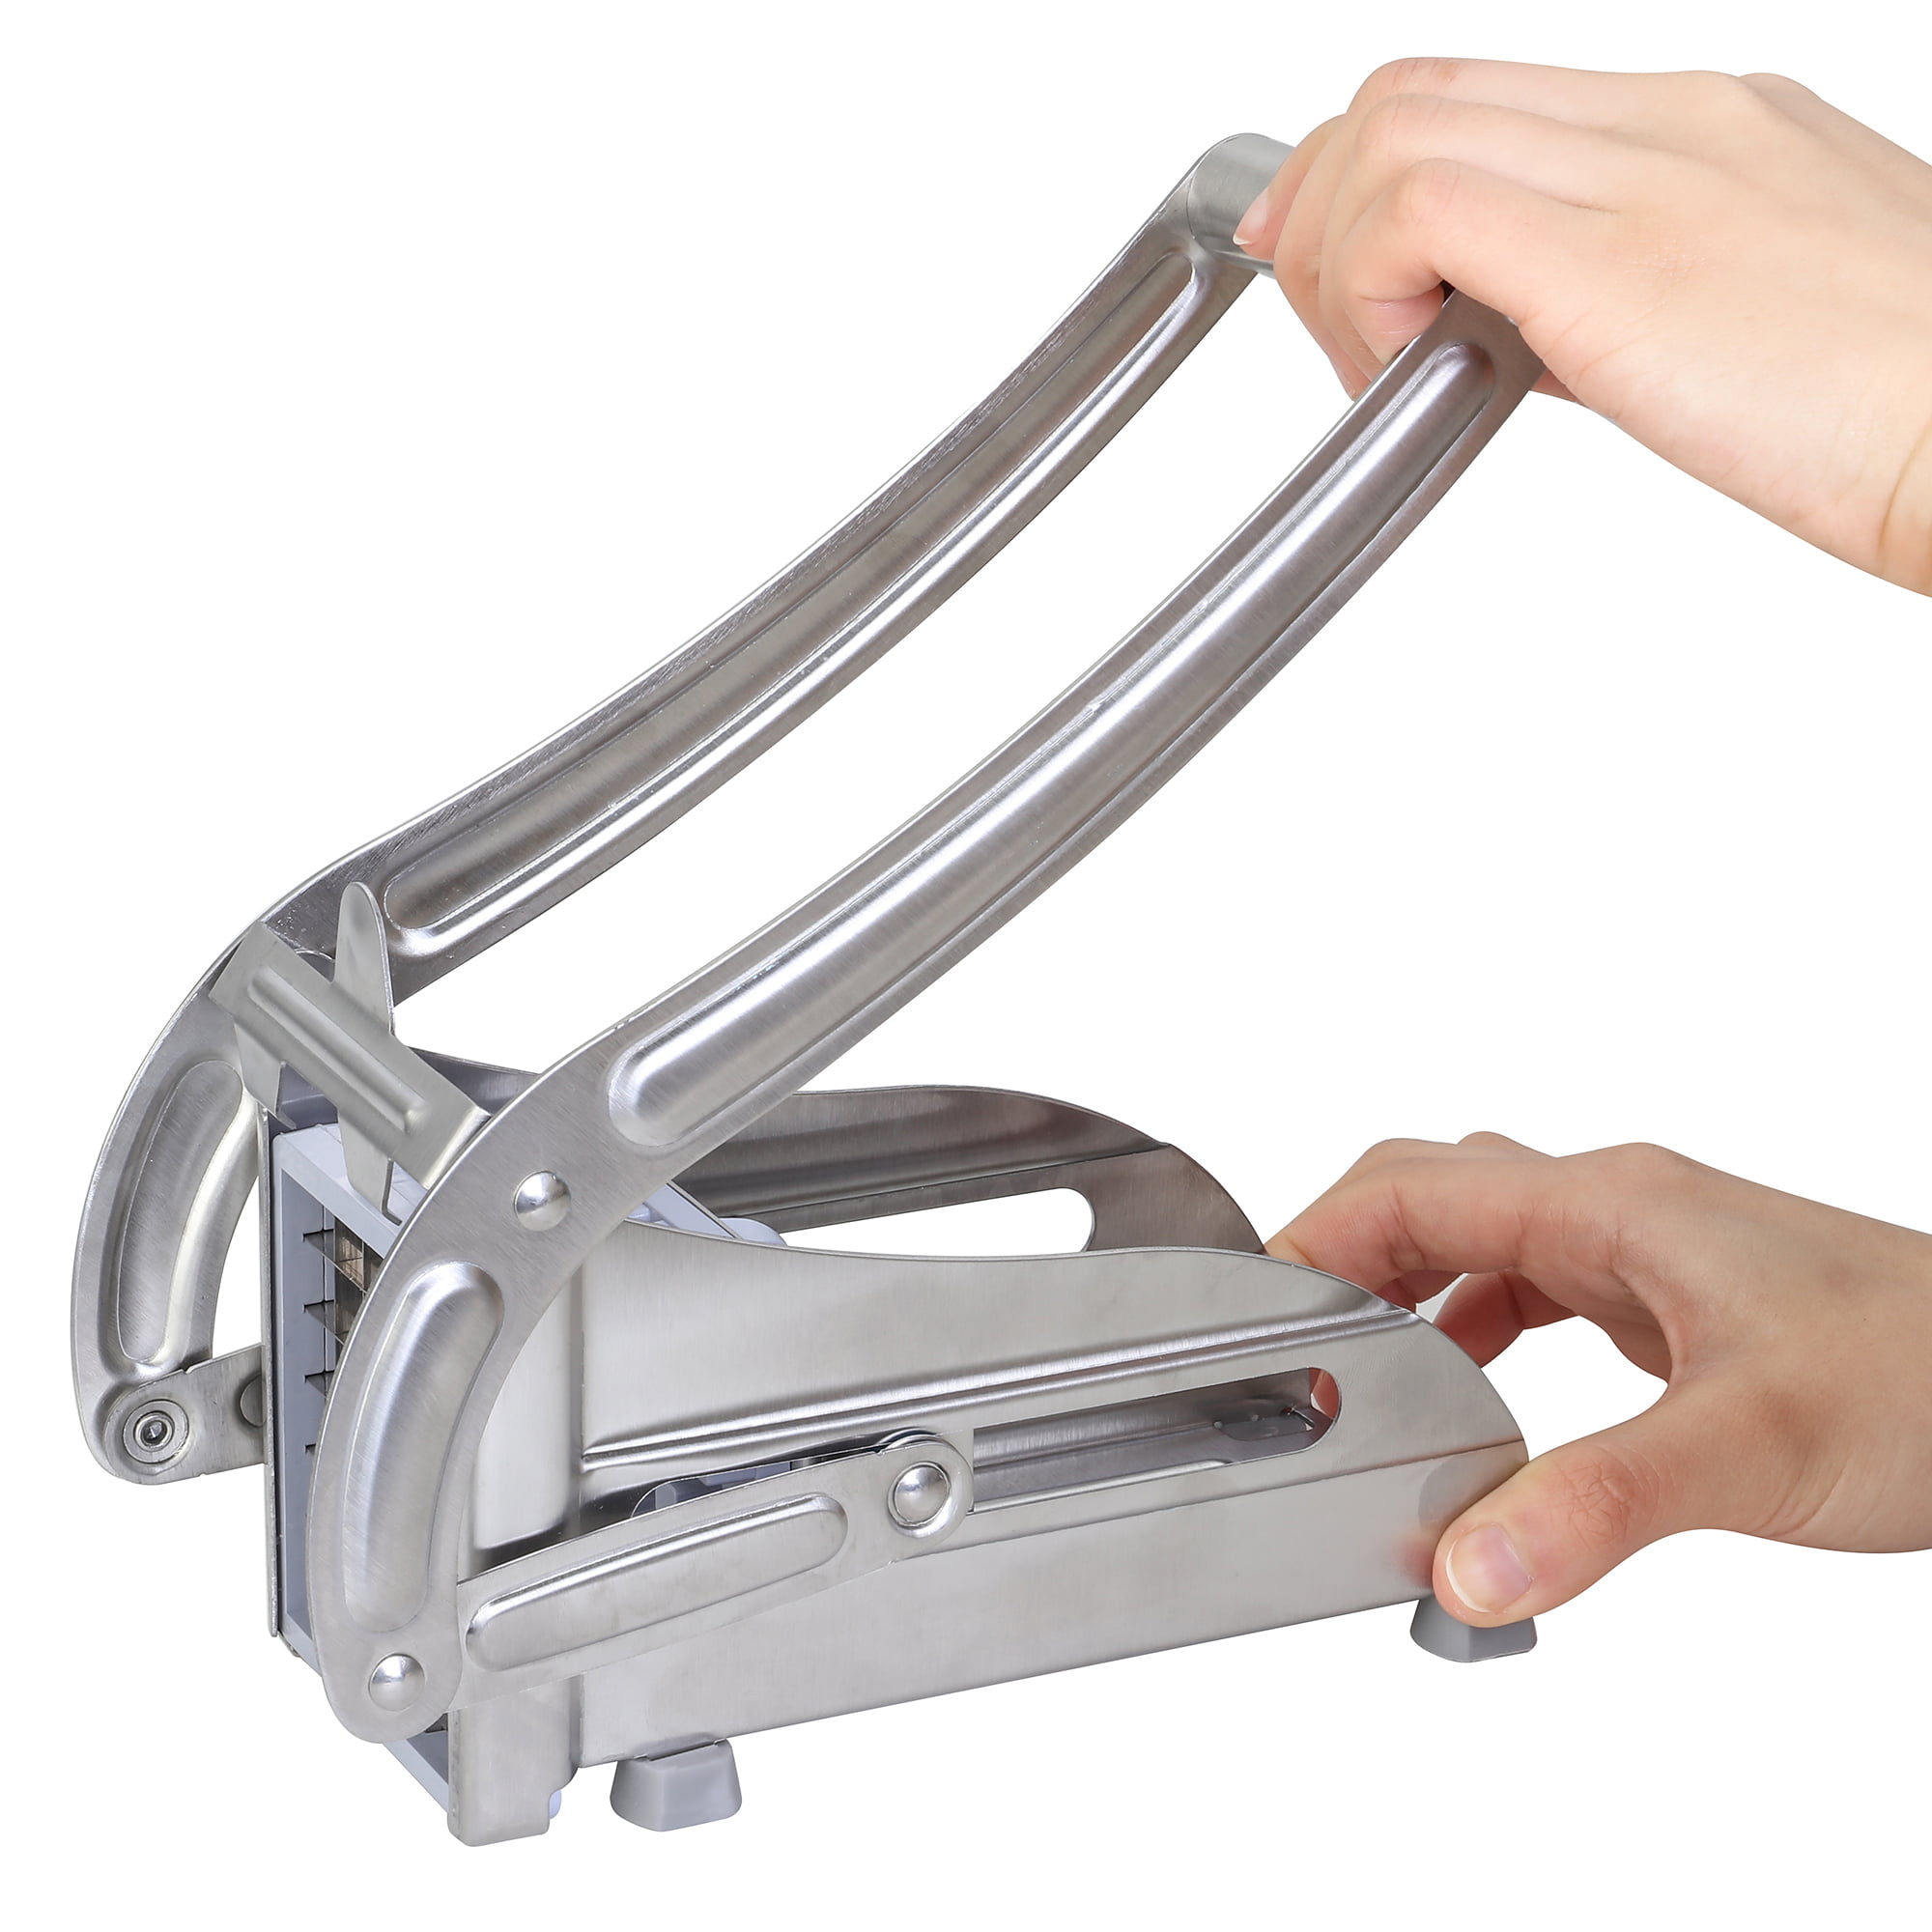 Stainless Steel French Fry Potato Cutter/Slicer – Daily Cool Gadgets